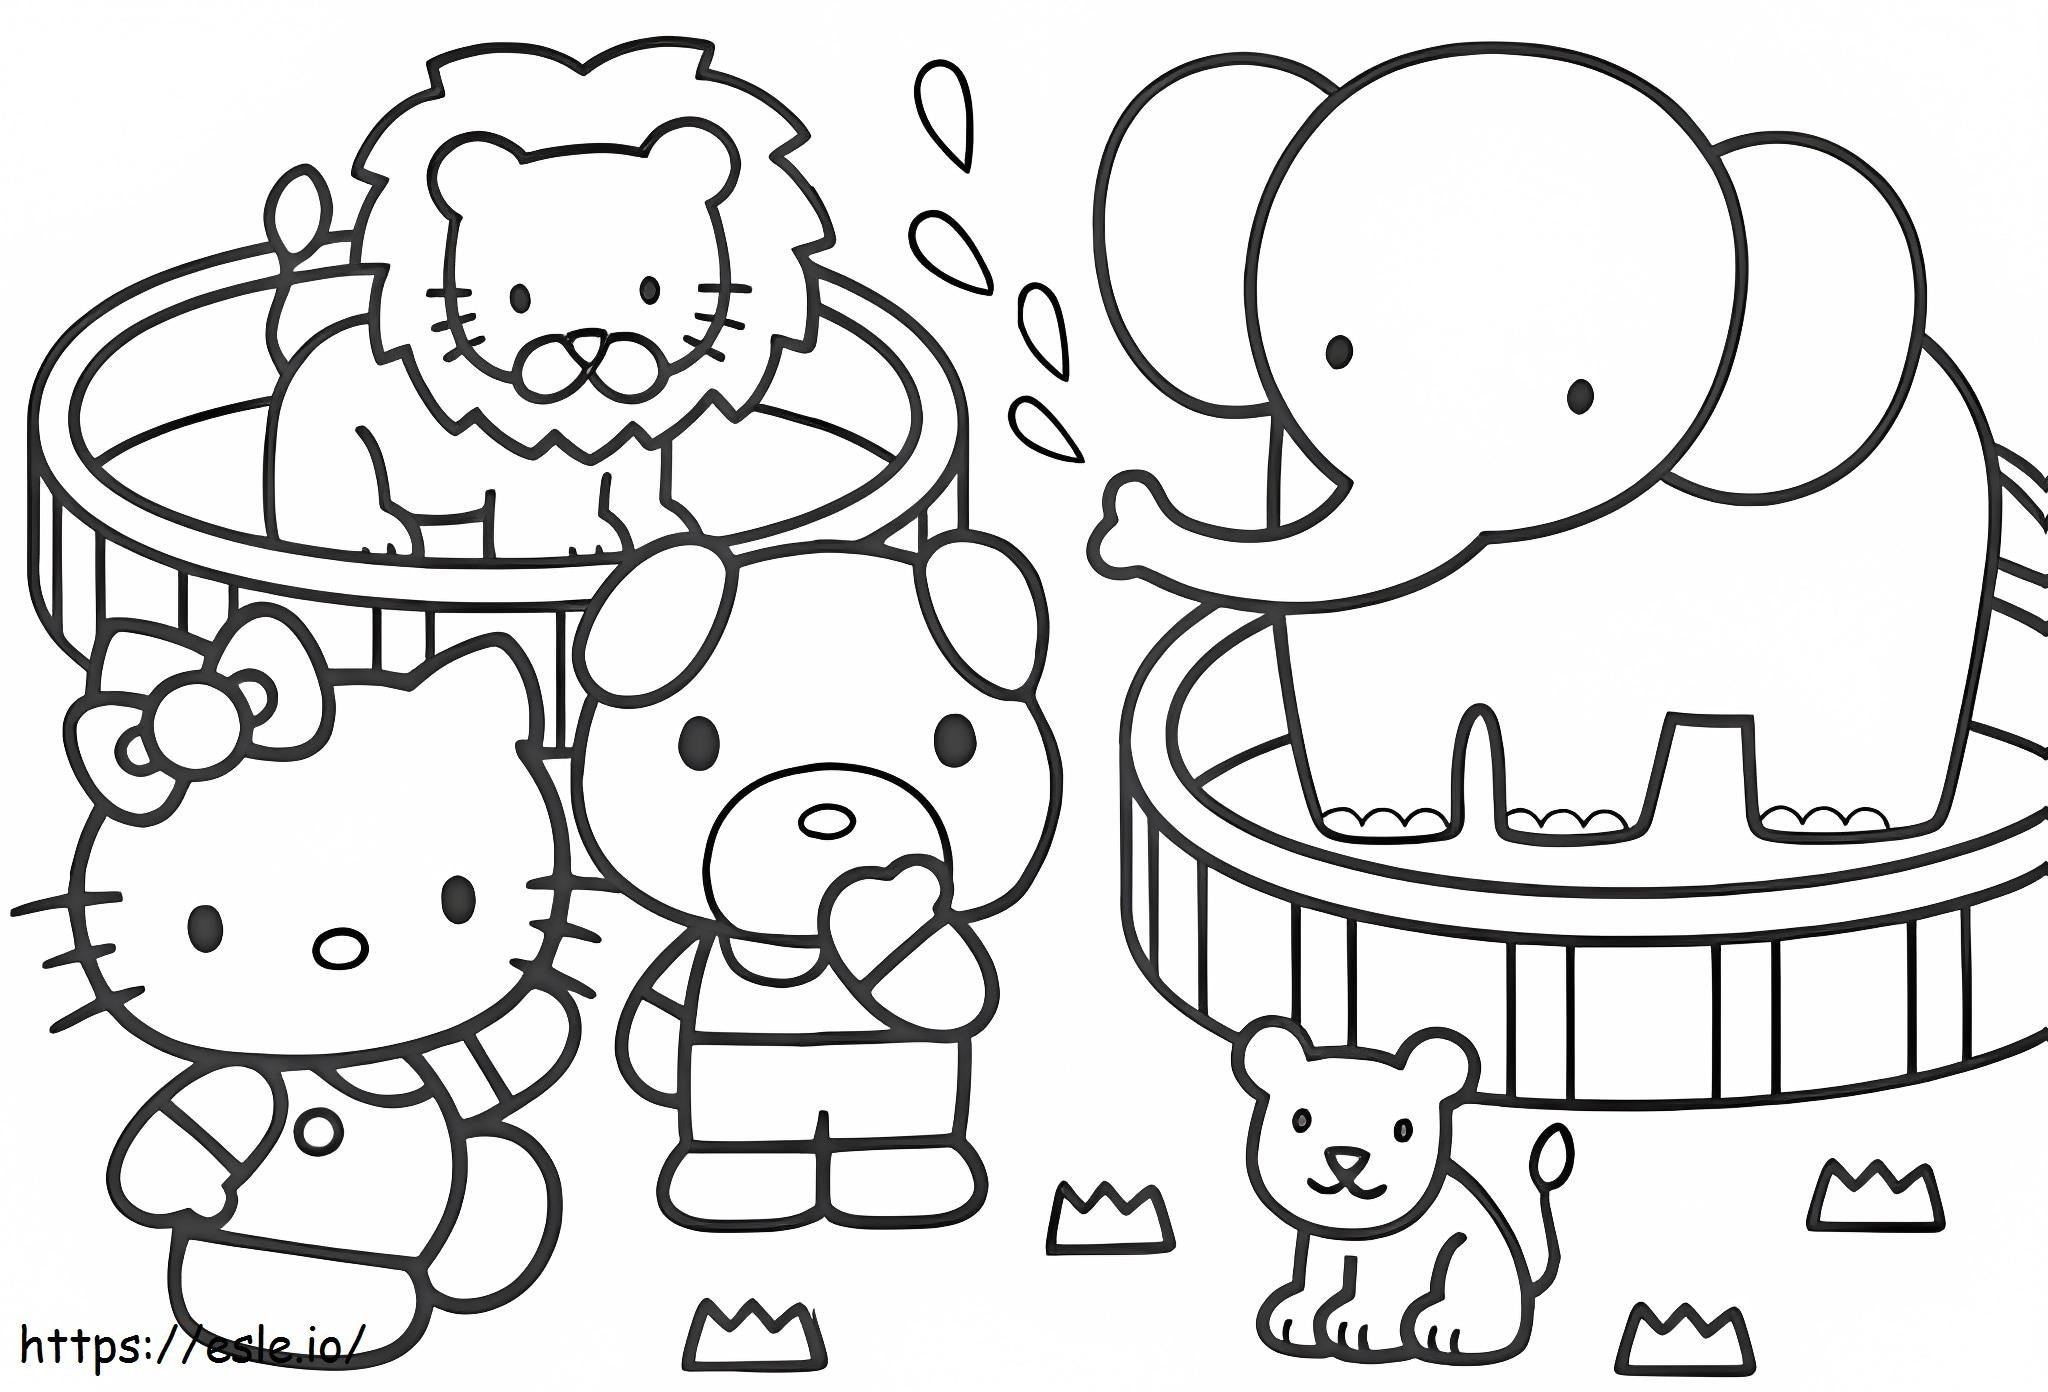 Easy Animal coloring page